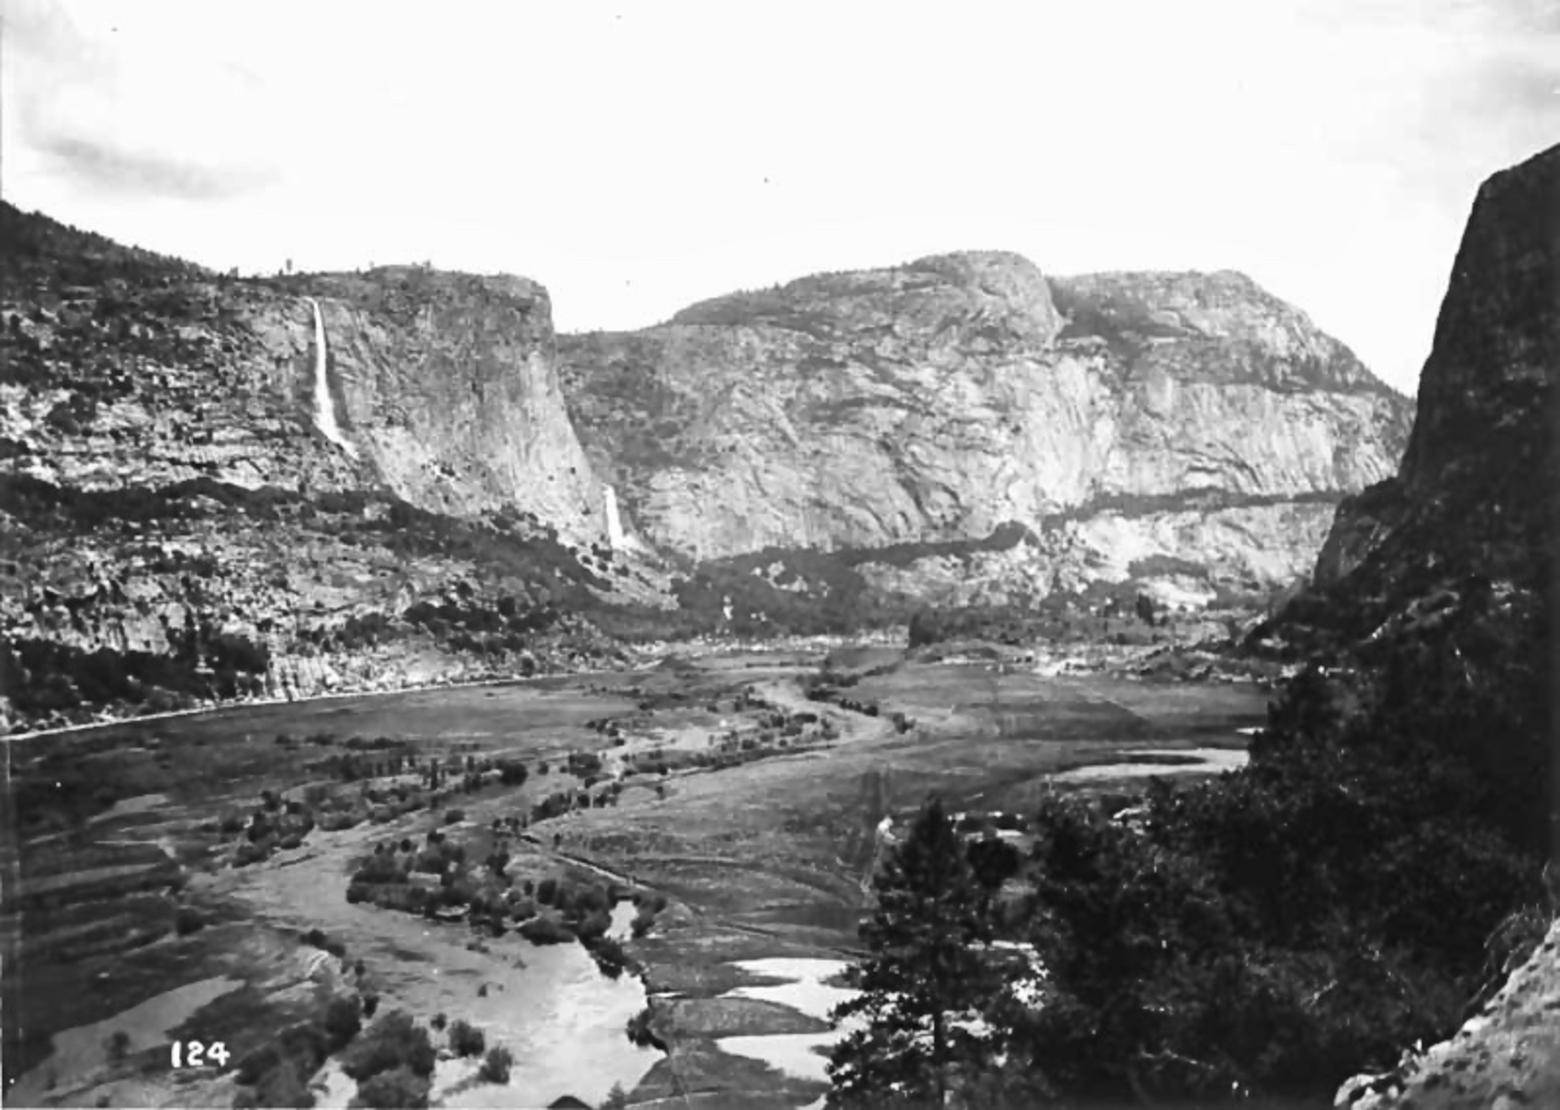 Waterfalls draping the mountains and the Tuolumne River flowing tranquilly through its middle, this is what the Hetch Hetchy Valley in Yosemite National Park looked like early in the 20th century. Photo courtesy National Park Service